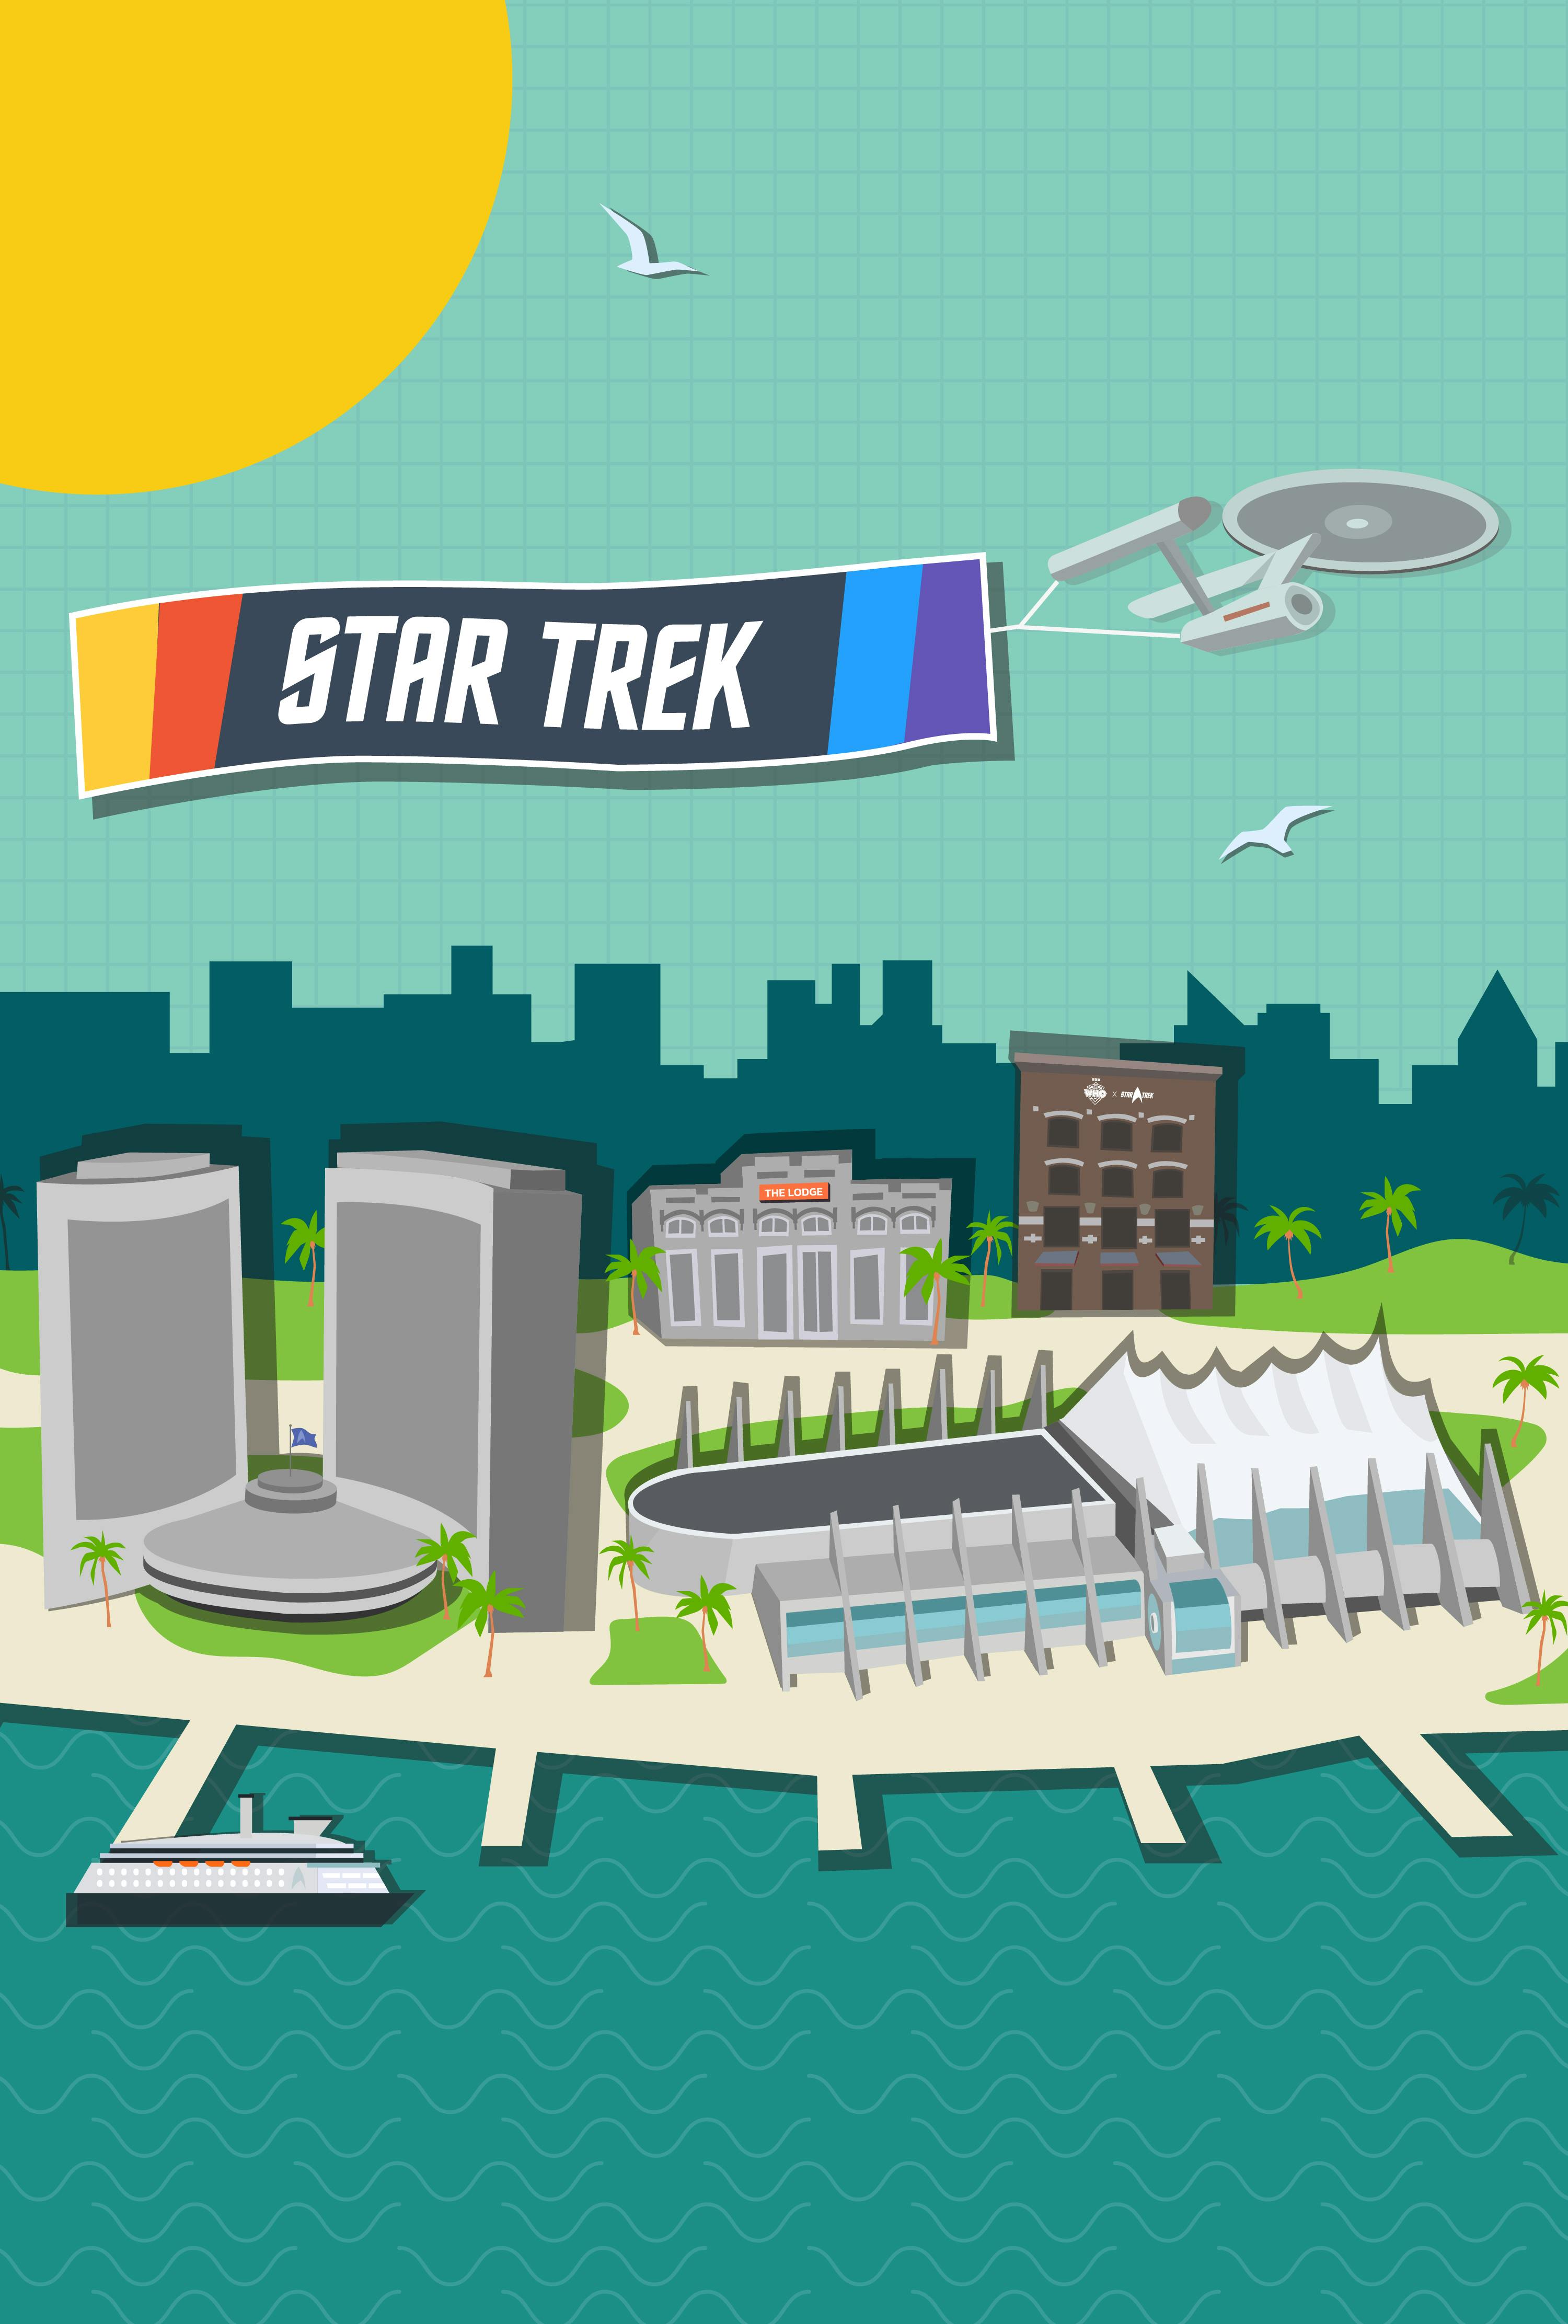 Graphic illustration of the San Diego Convention Center and Gaslamp area with the Enterprise flying overhead pulling a Star Trek banner